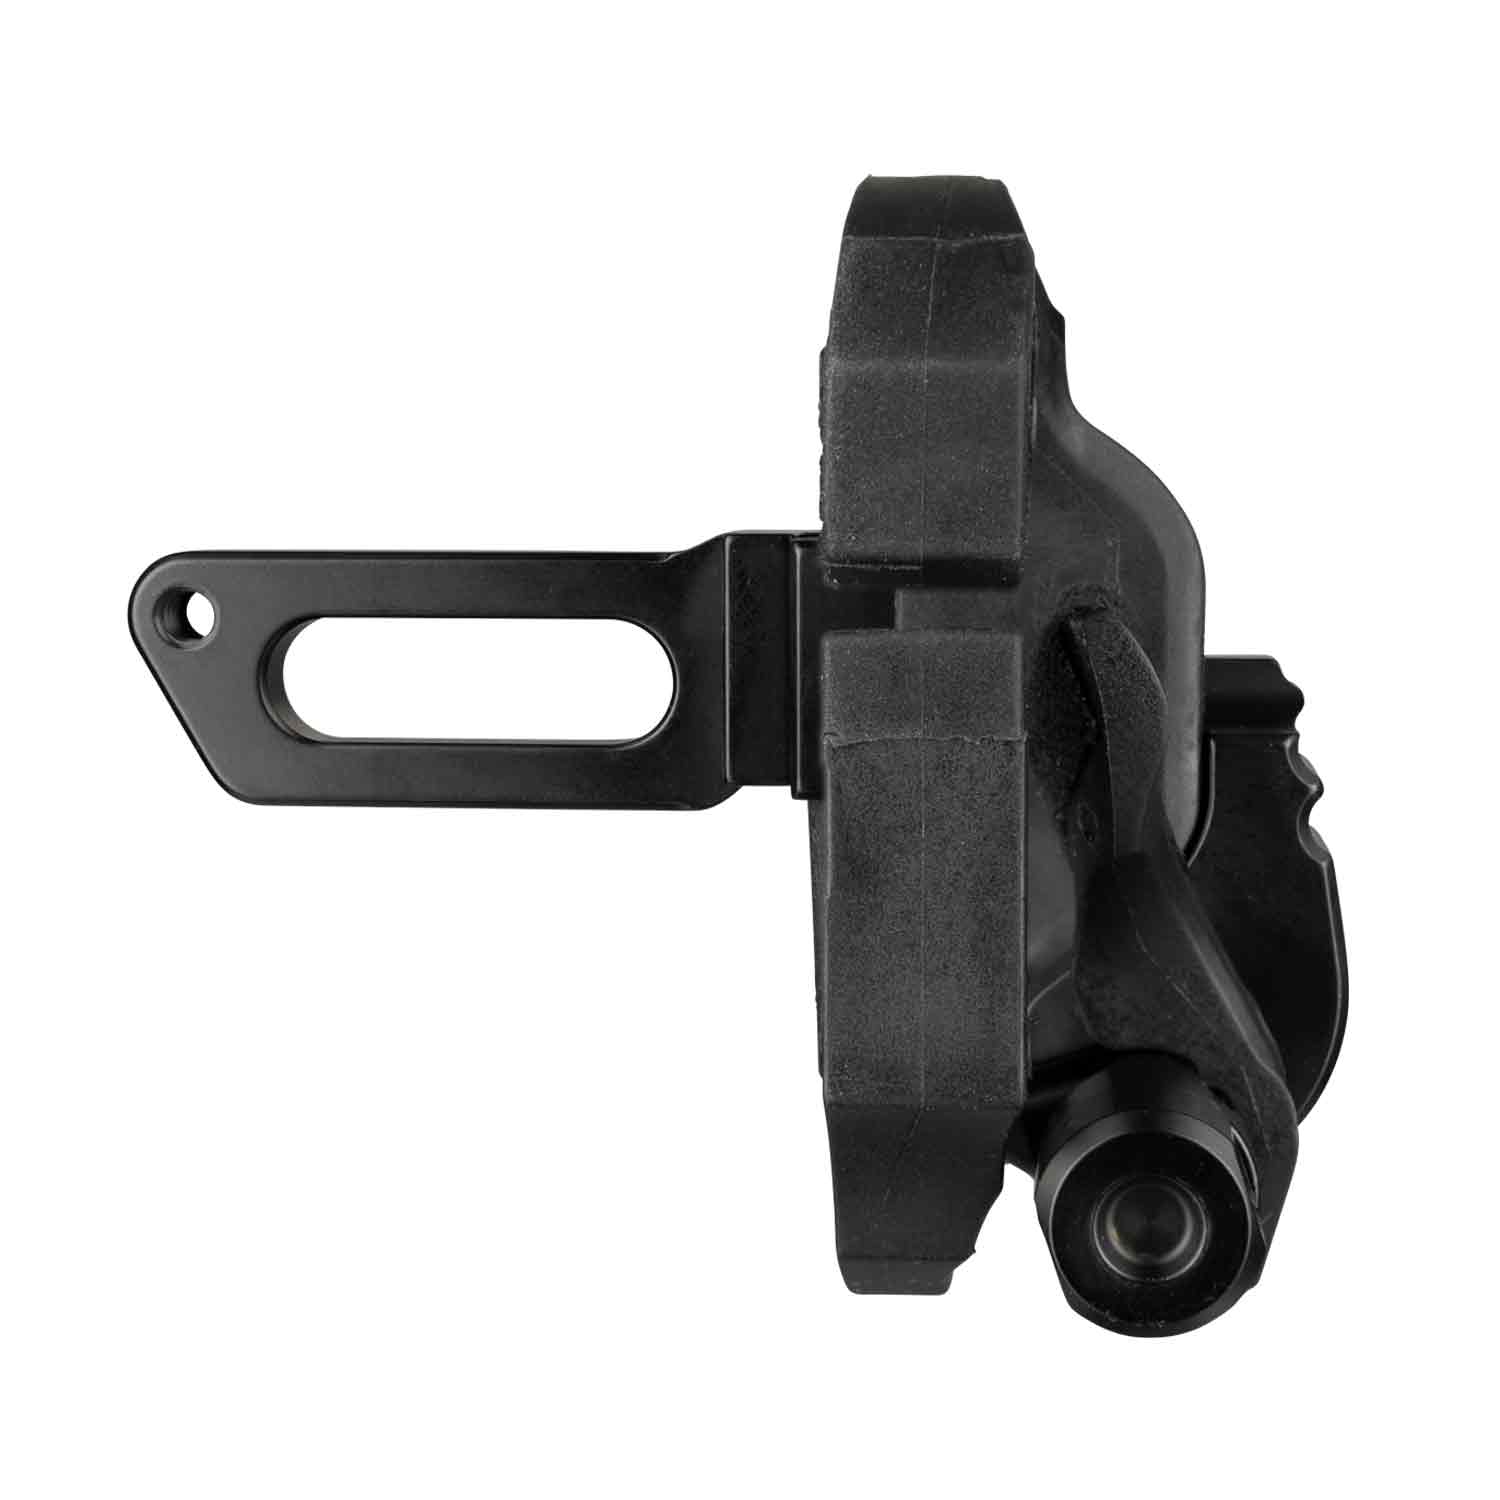 Ripcord Ratchet Standard Mount Limb Driven Rest with Micro-Adjustment